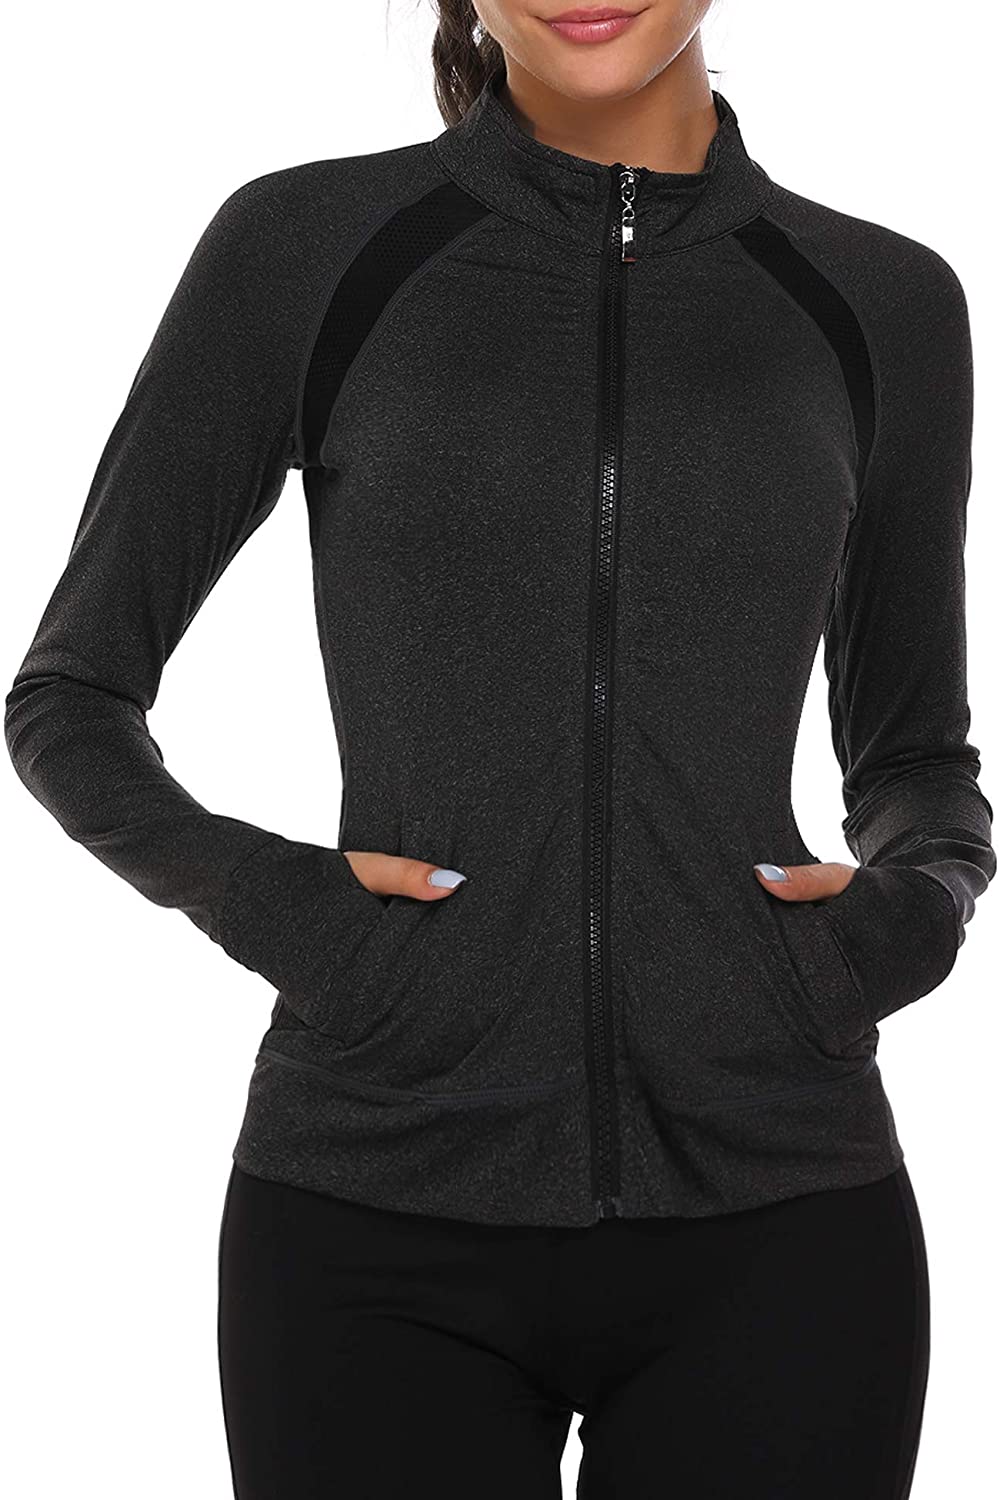 FindThy Women’s Slim Cropped Yoga Workout Jackets Full-Zip Activewear with Thumbholes 